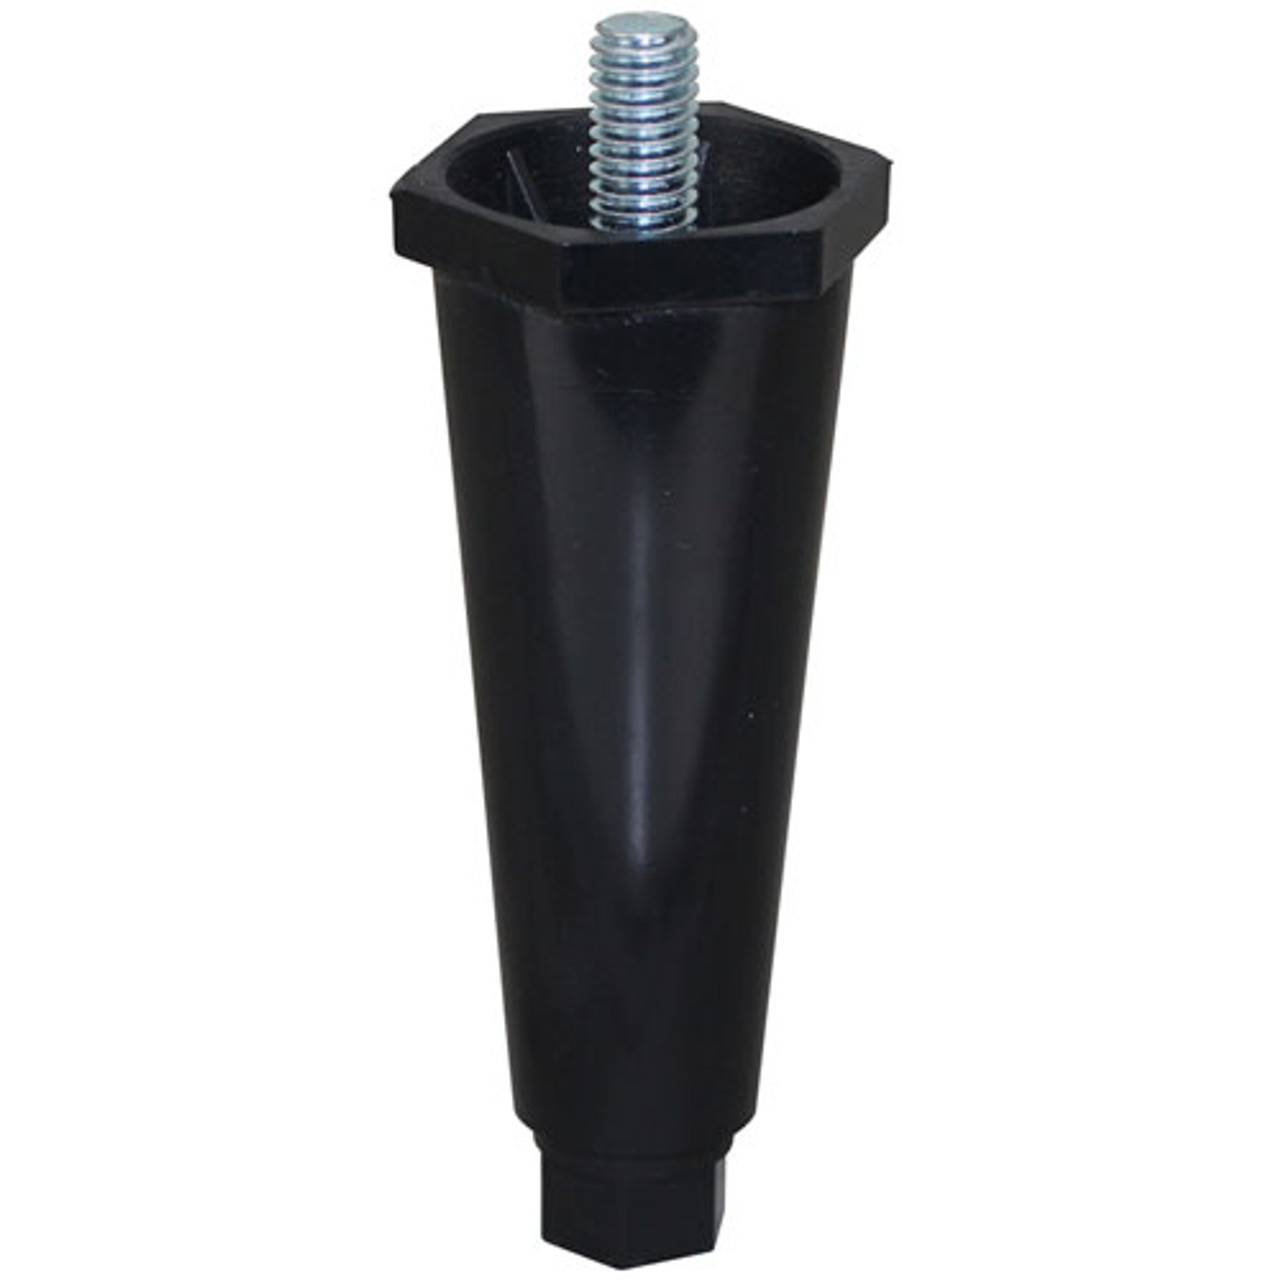 Leg 4H 3/8-16 - Replacement Part For Hatco HT5-30-007-00